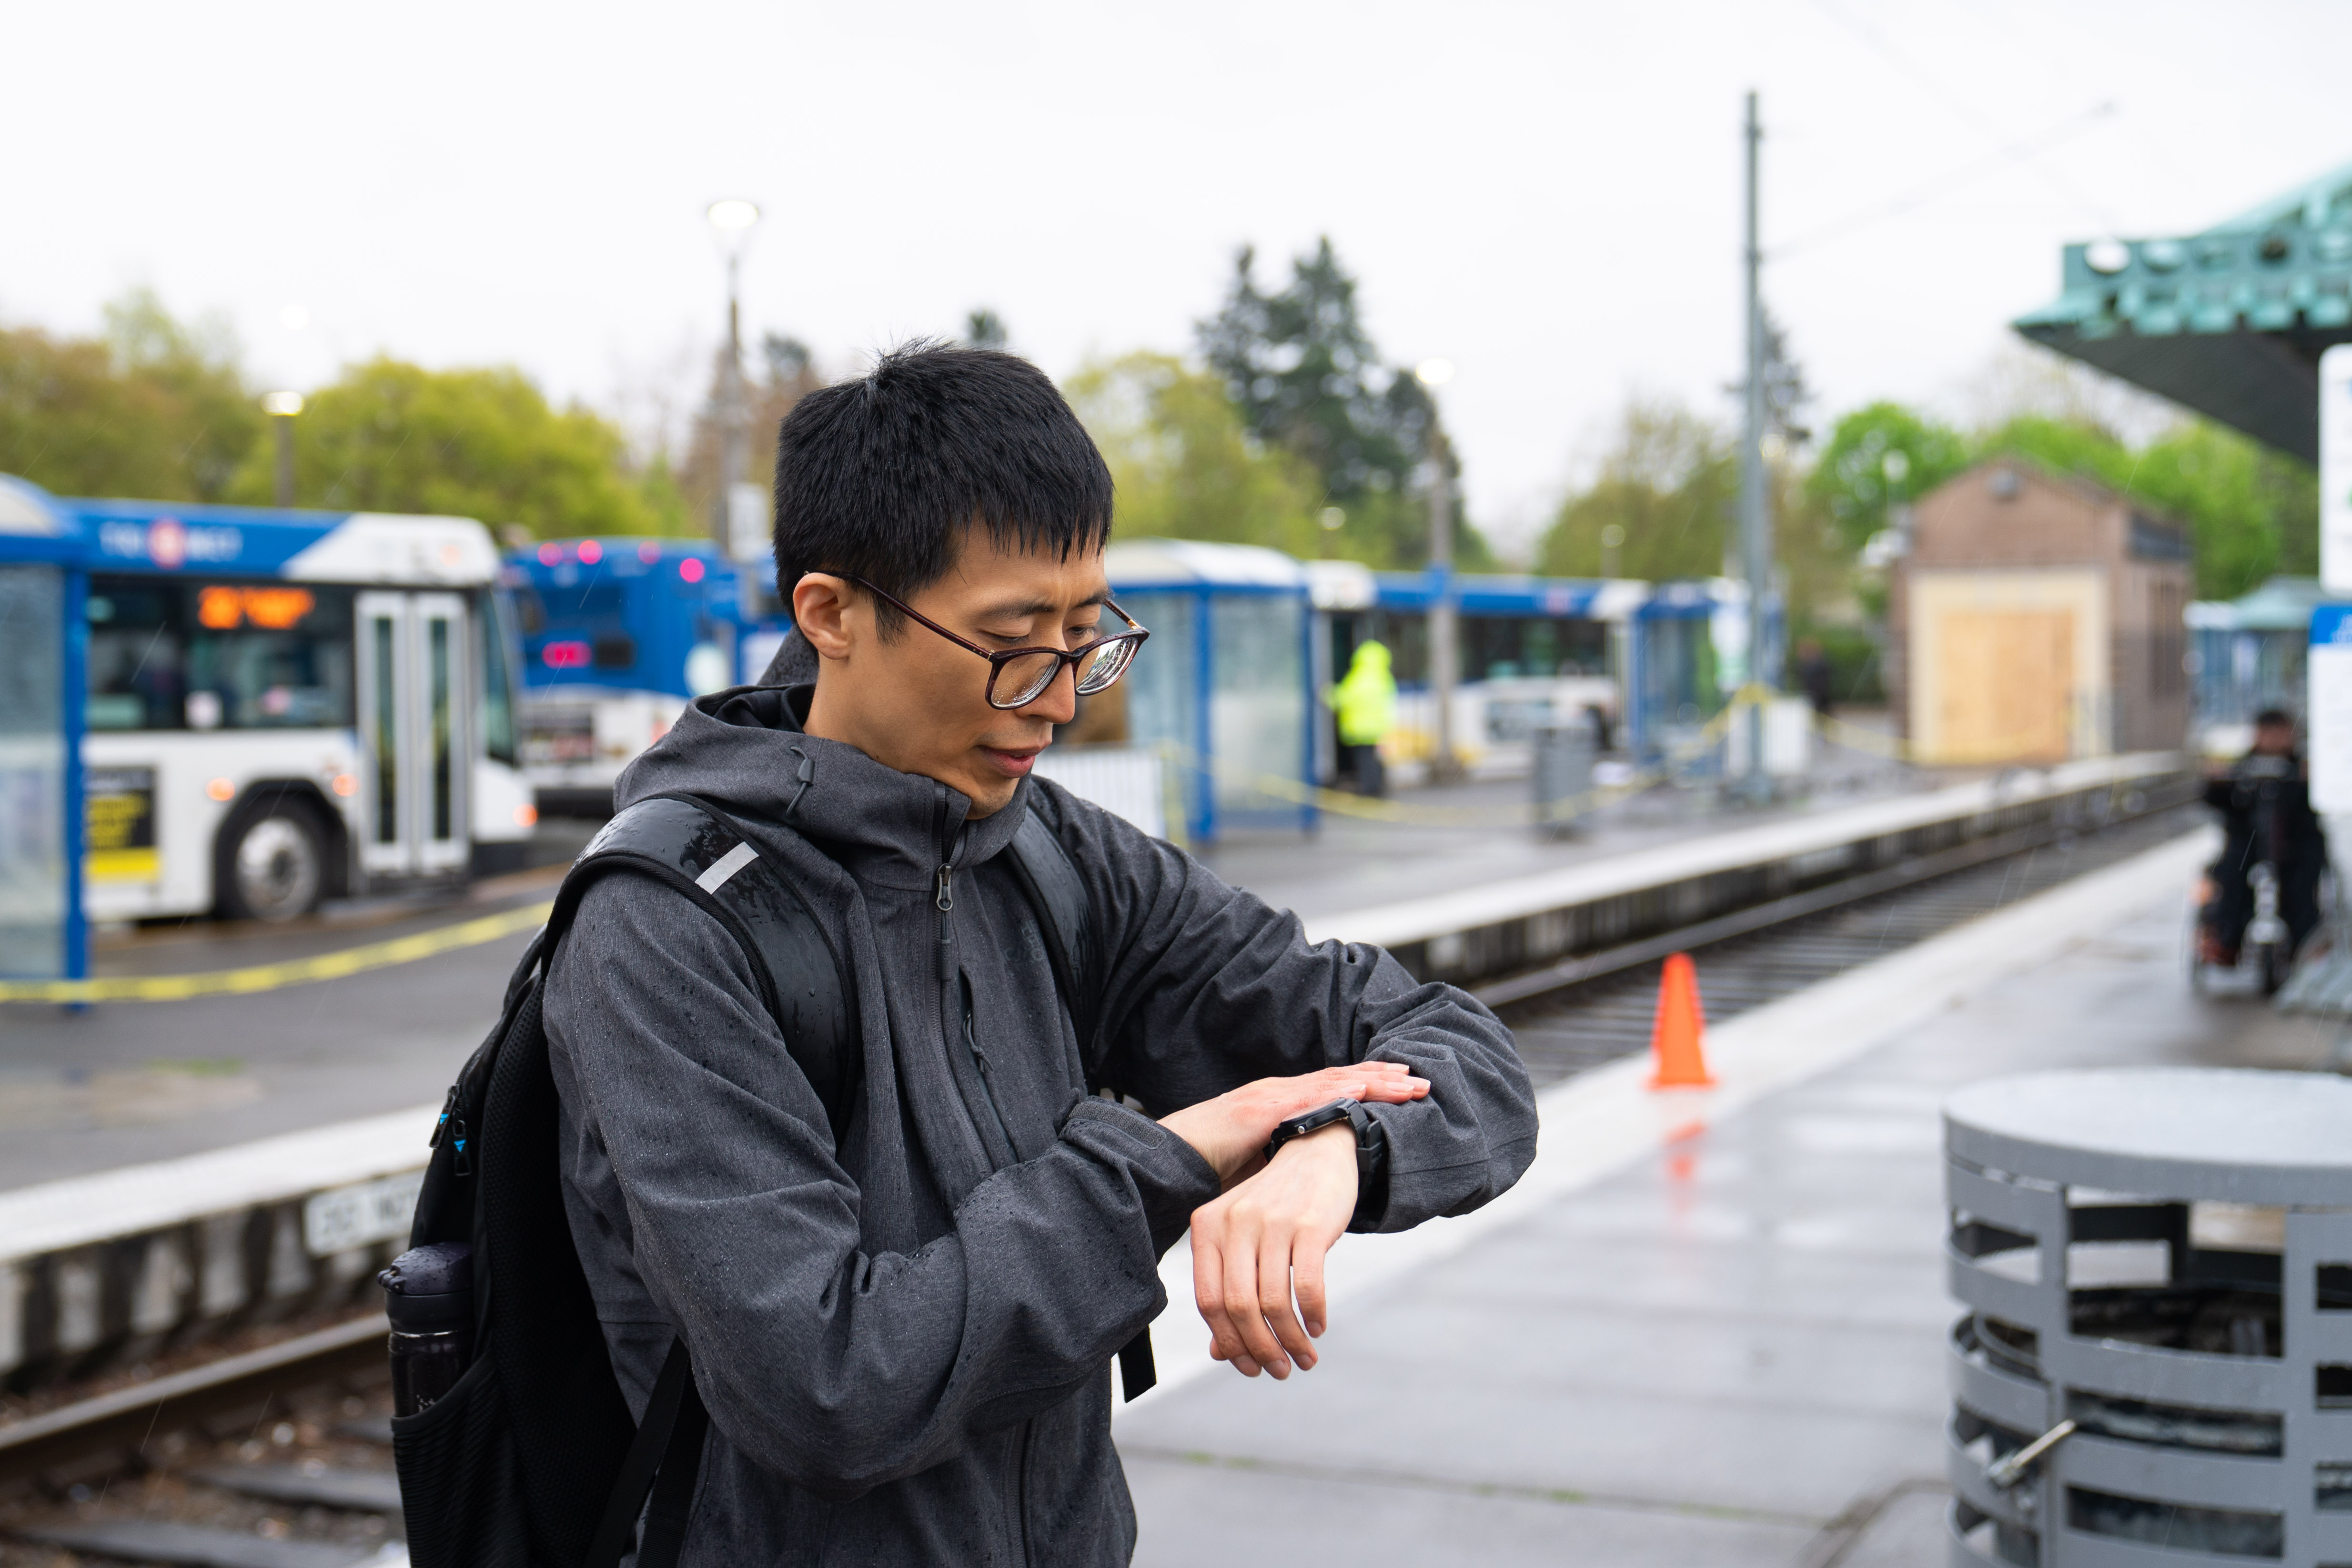 Man looks at watch waiting for train